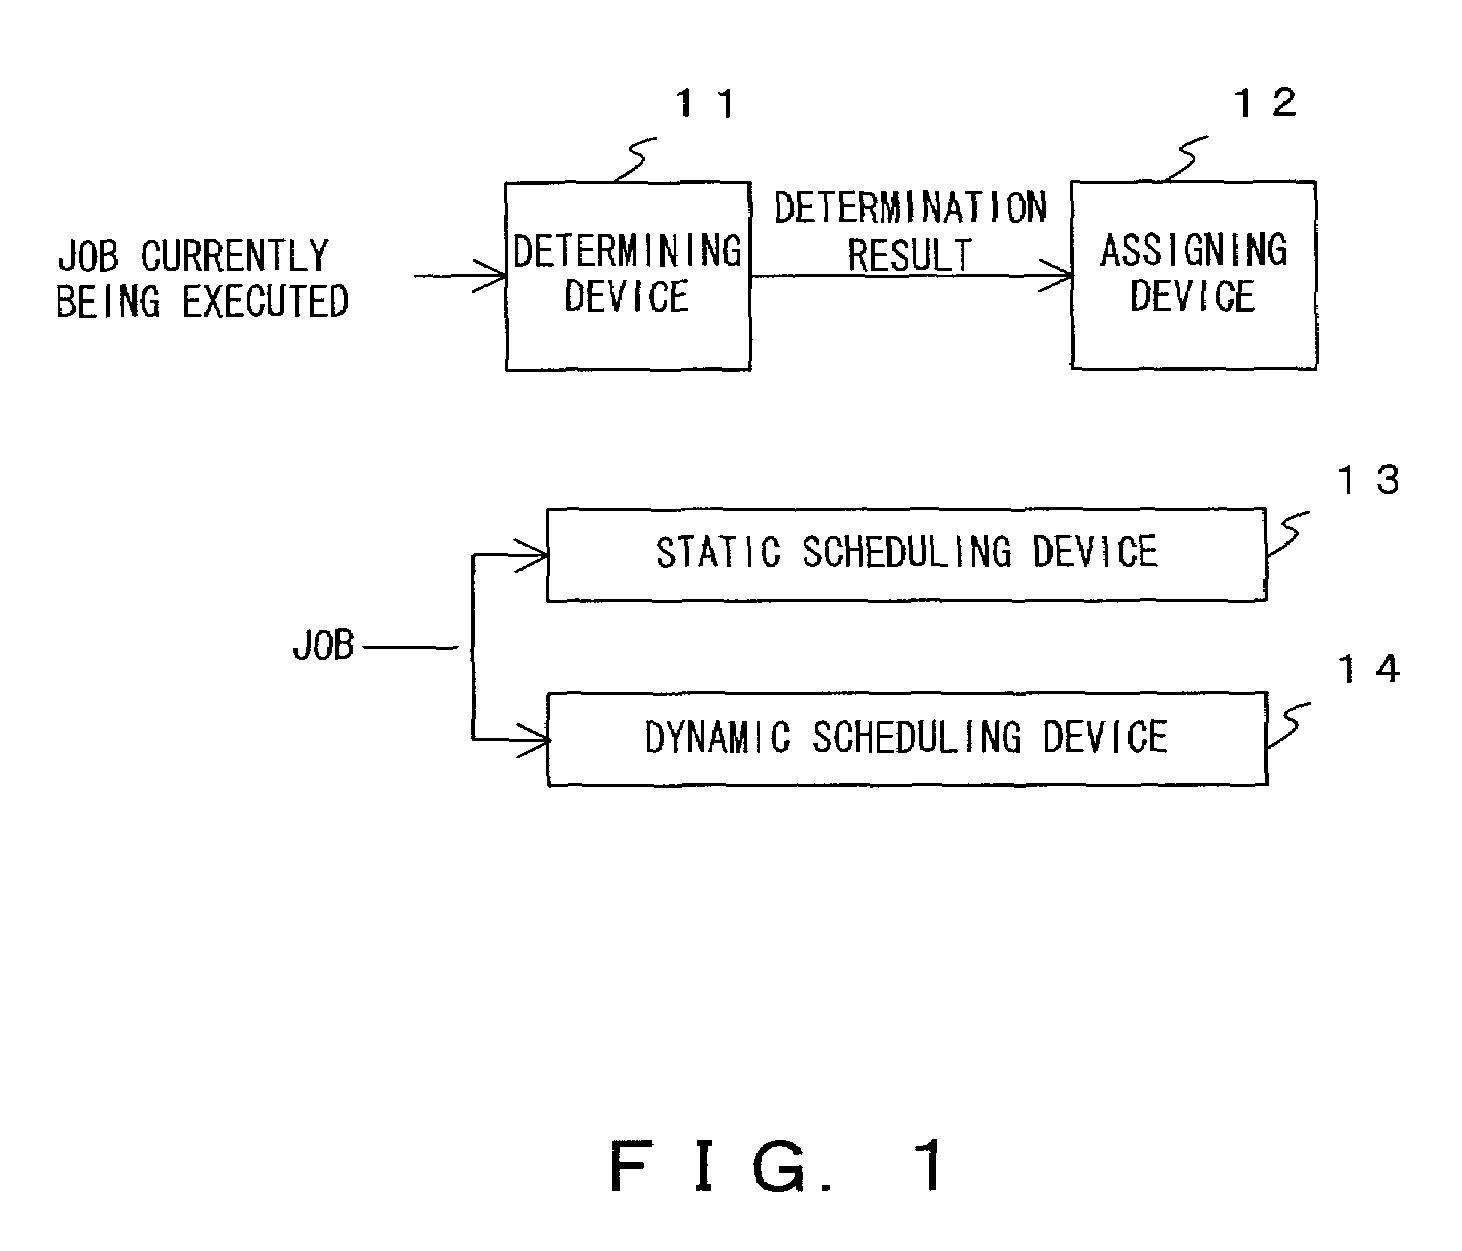 Scheduling apparatus performing job scheduling of a parallel computer system